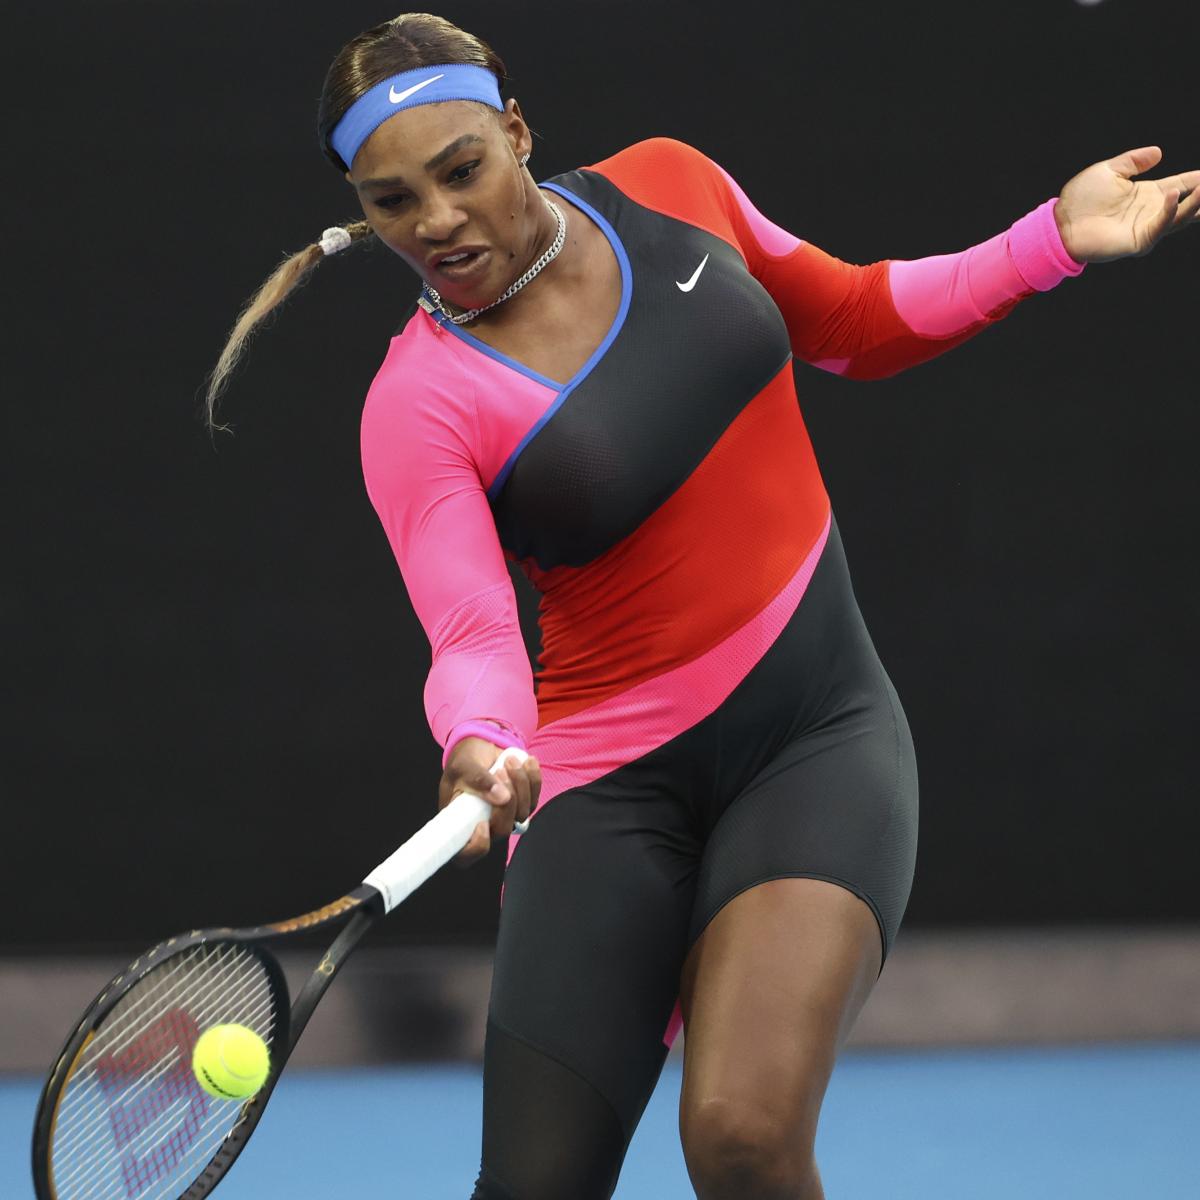 Serena Williams Withdraws From Miami Open After Undergoing Oral Surgery News Scores 9056